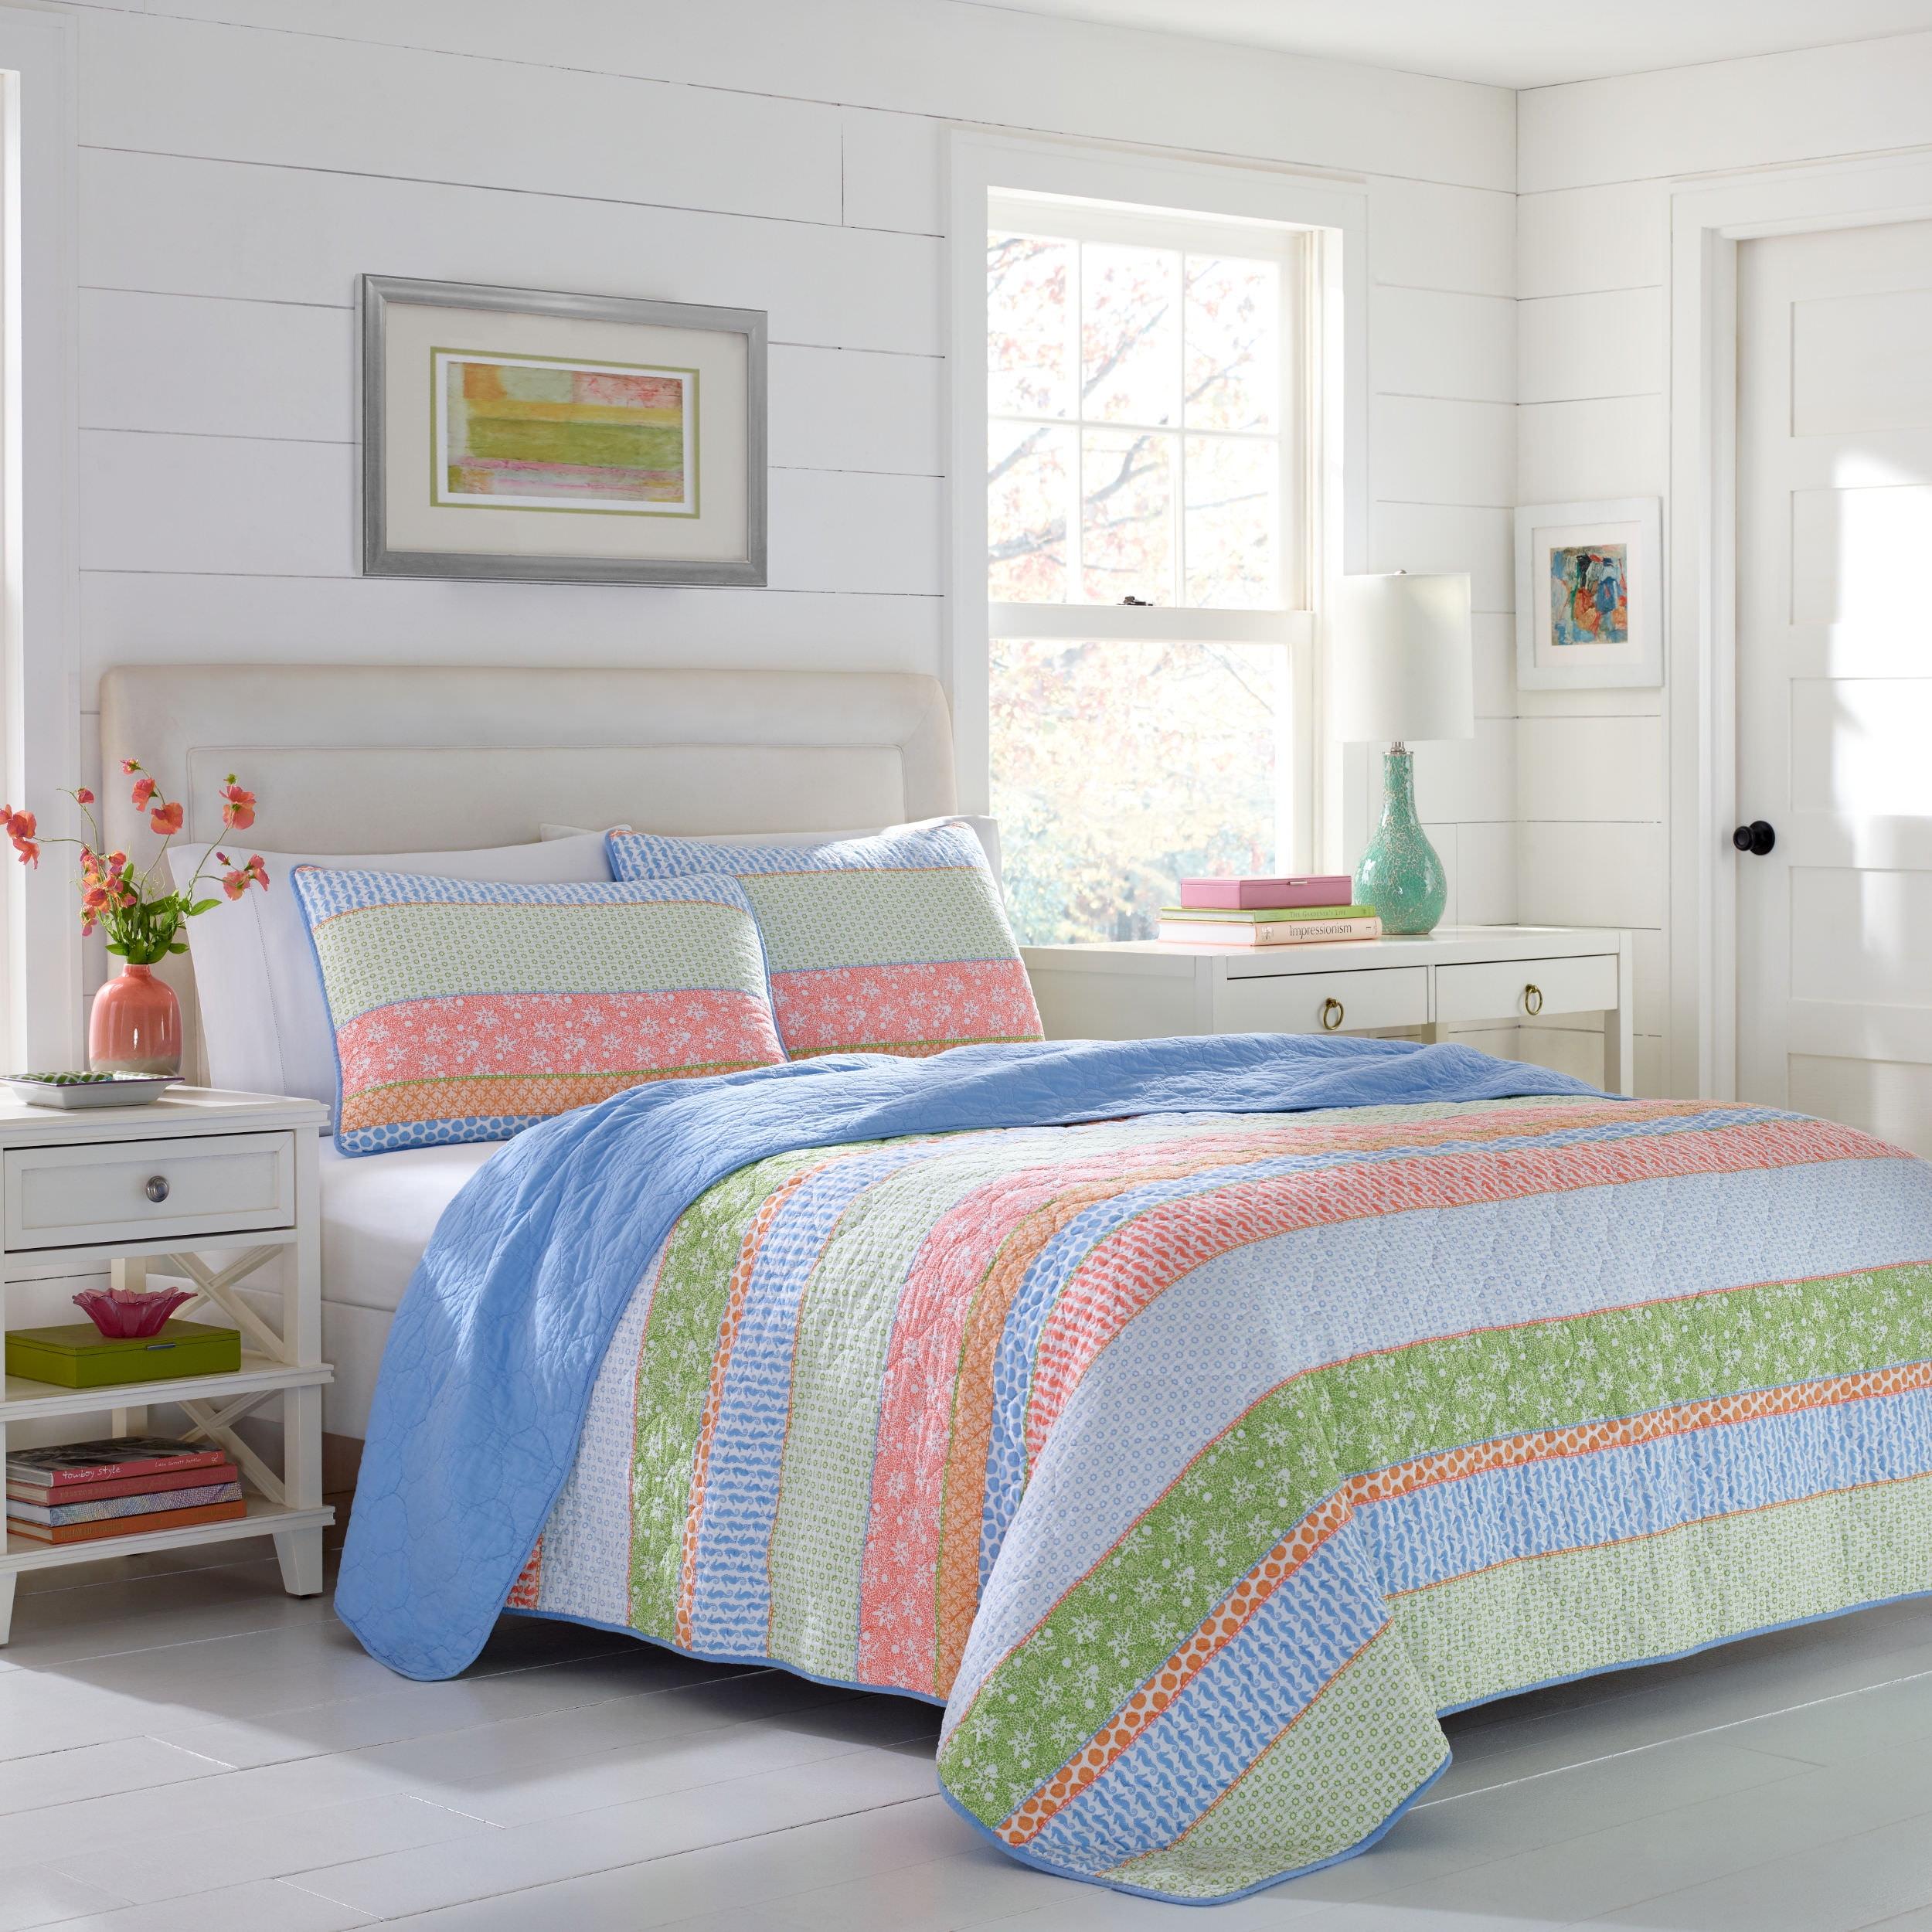 Bohemian Bliss Reversible Cotton Quilt Set in Chambray Blue, Full Size